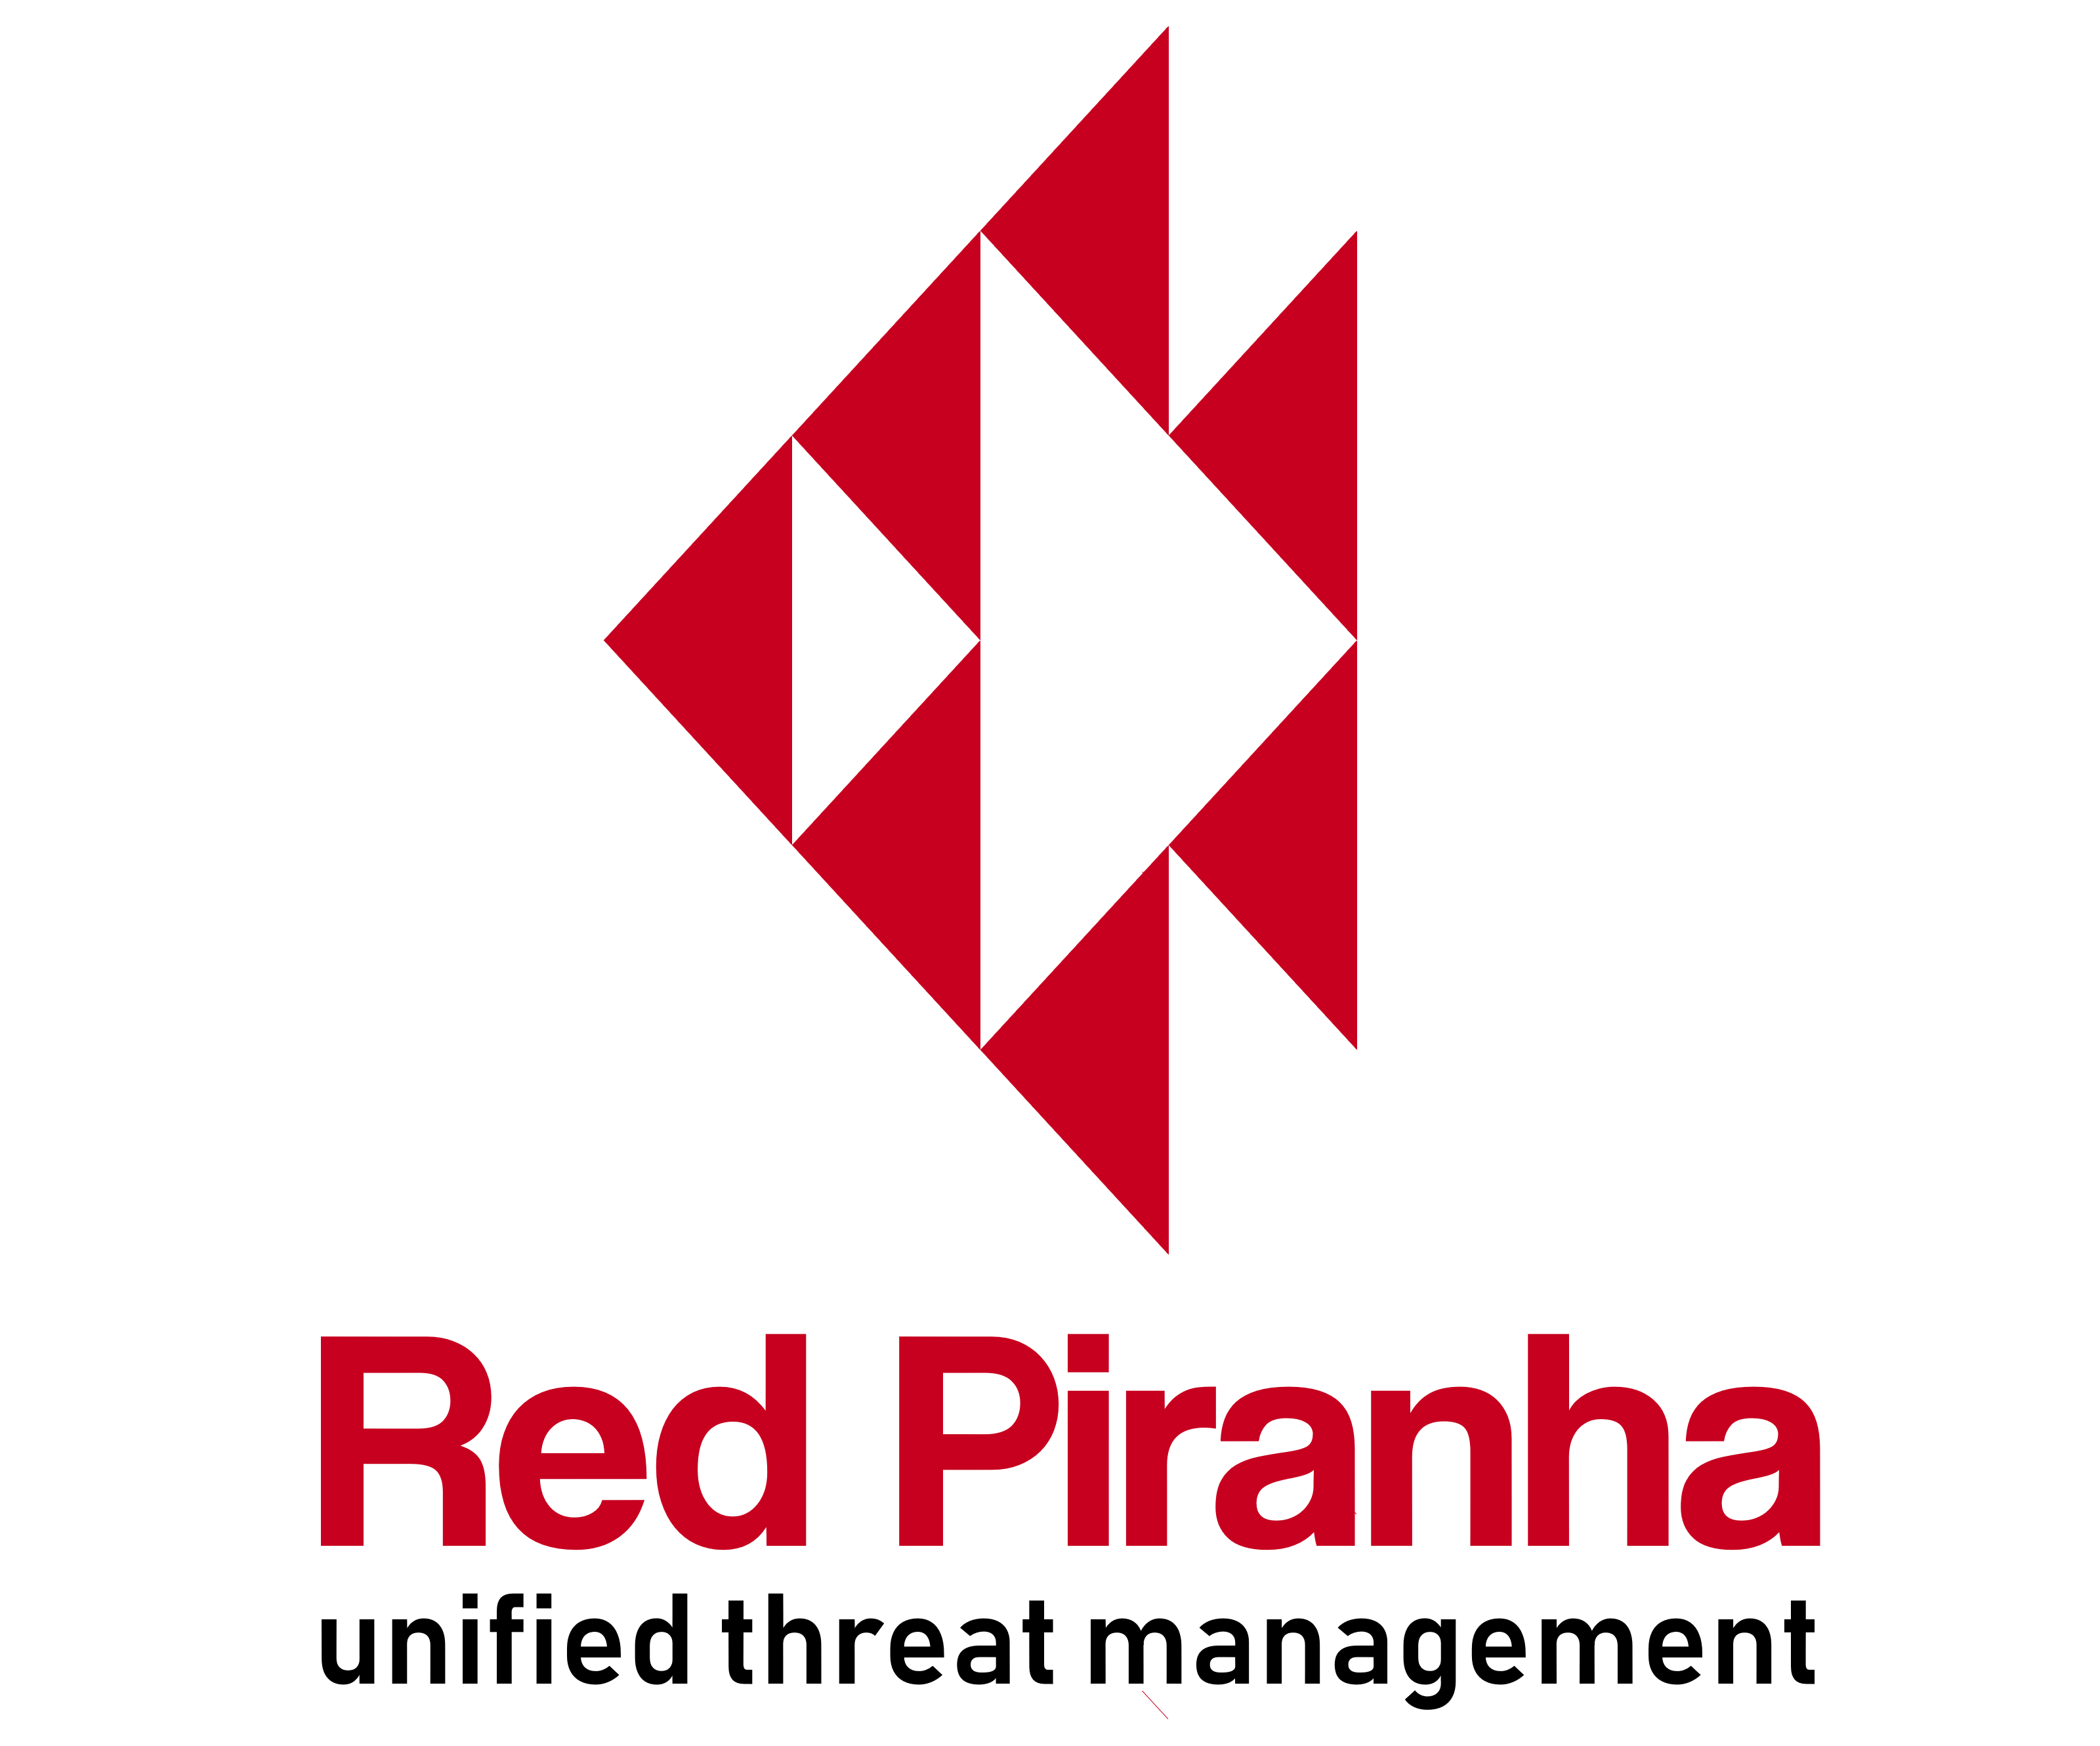 Red Piranha profile on Qualified.One